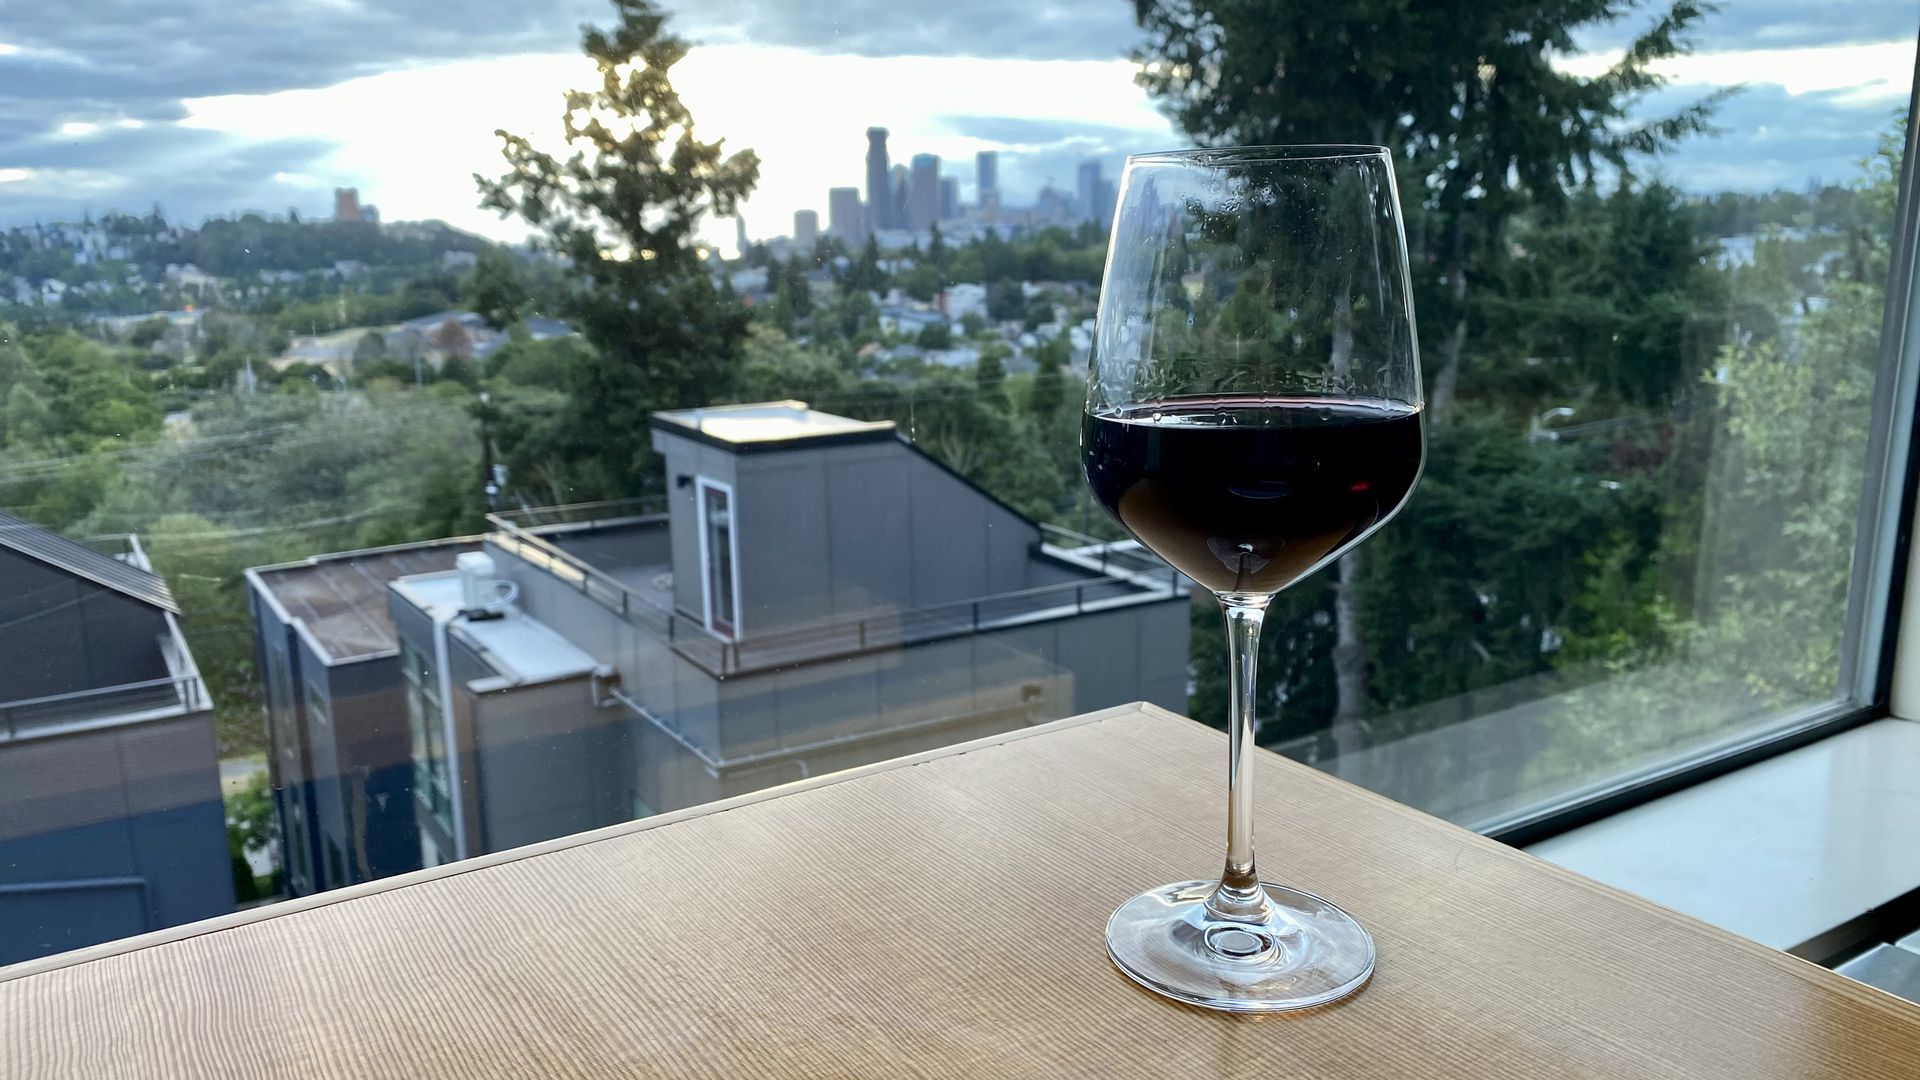 A glass of red wine on a wooden bar next to a window, with views of trees and the city in the distance.